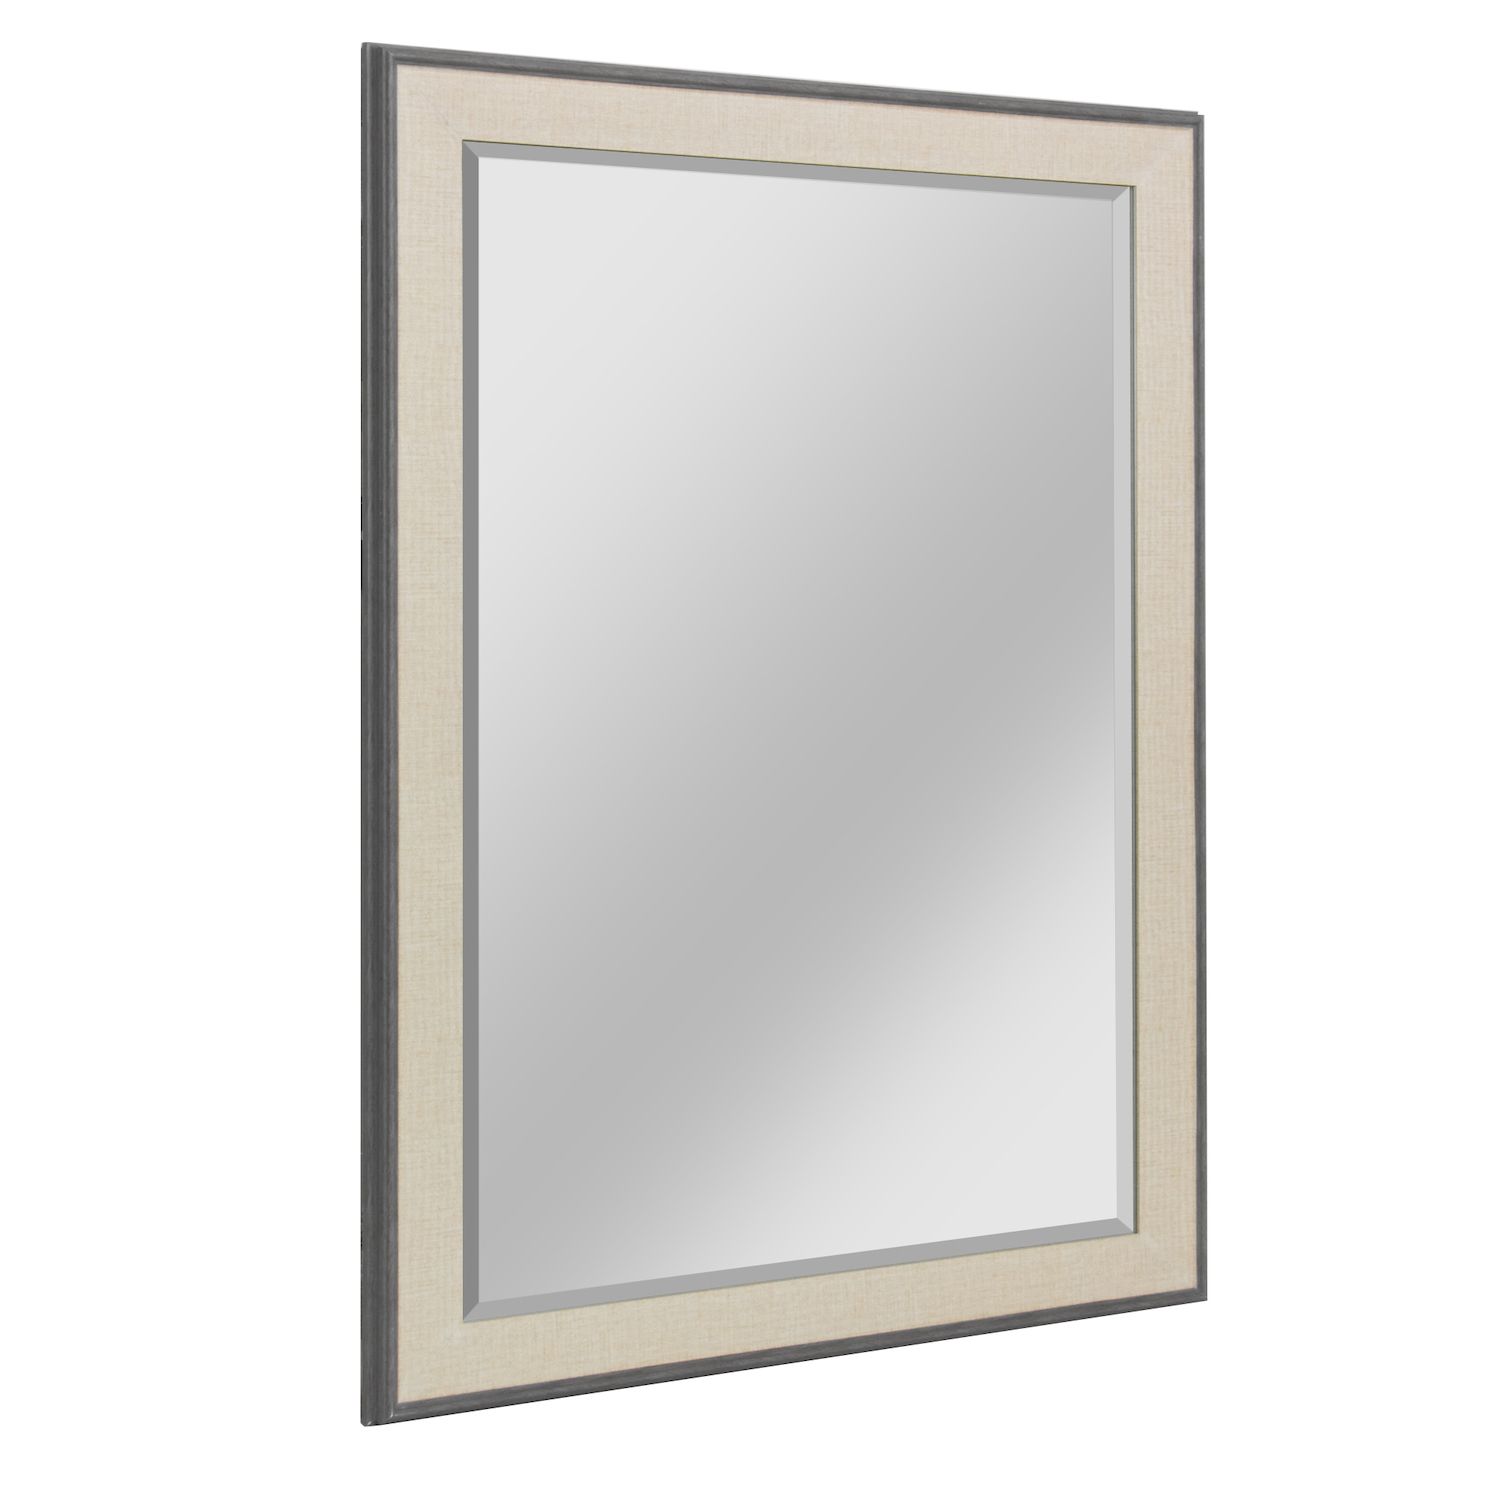 Image for Head West Gray Framed Wall Vanity Mirror 27" x 33" at Kohl's.